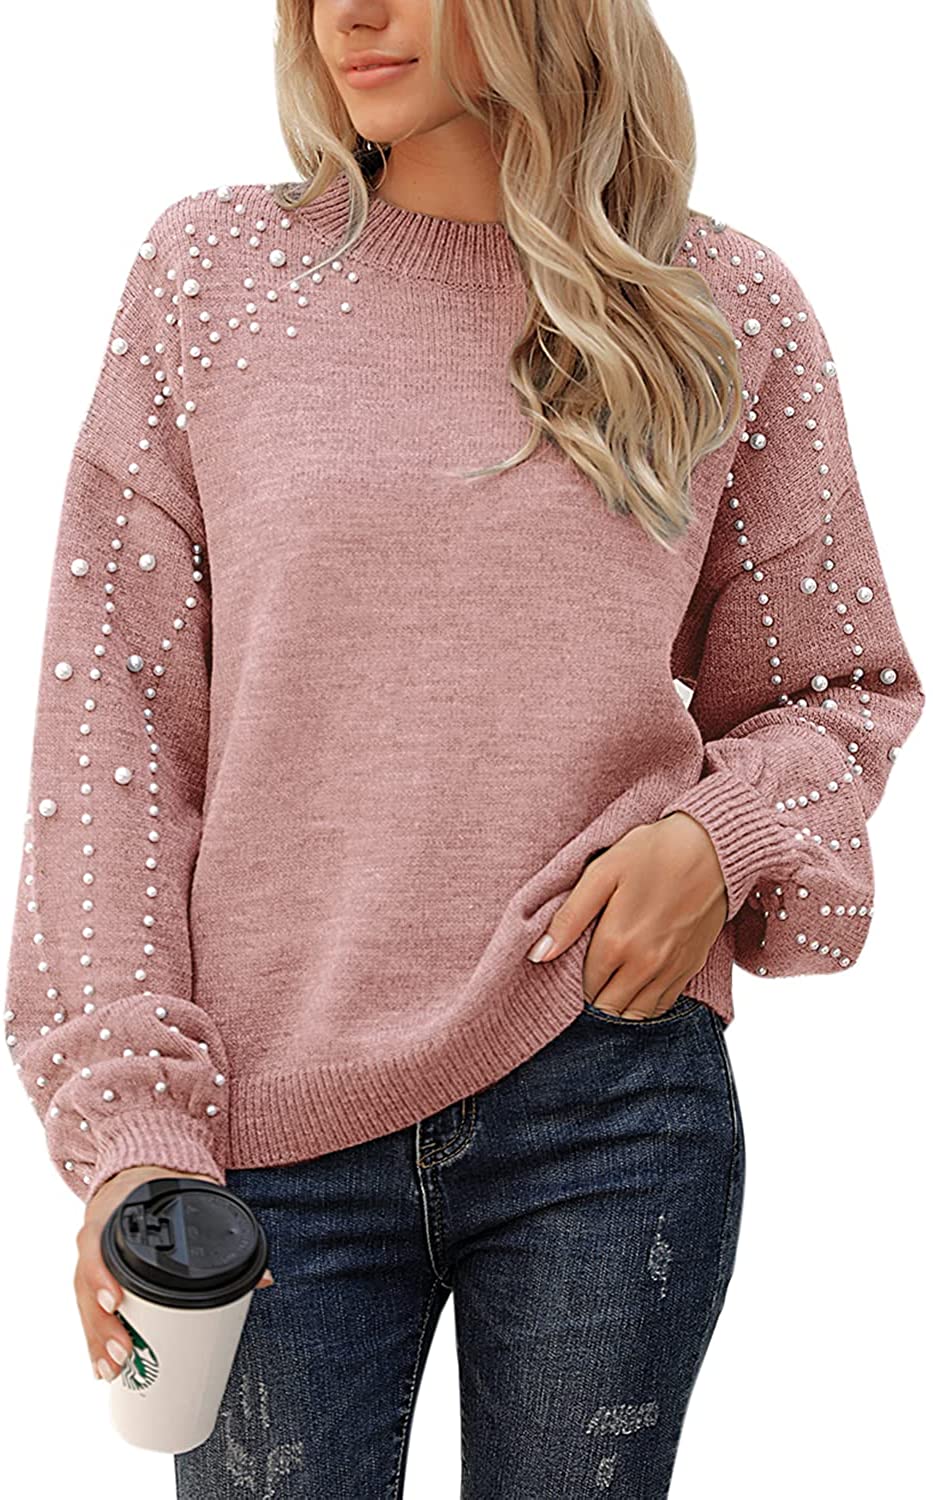 Blooming Jelly Women's Chunky Sweater Crewneck Sweatshirt Knit Lantern Sleeve Oversized Pullover Sweater with Pearls 